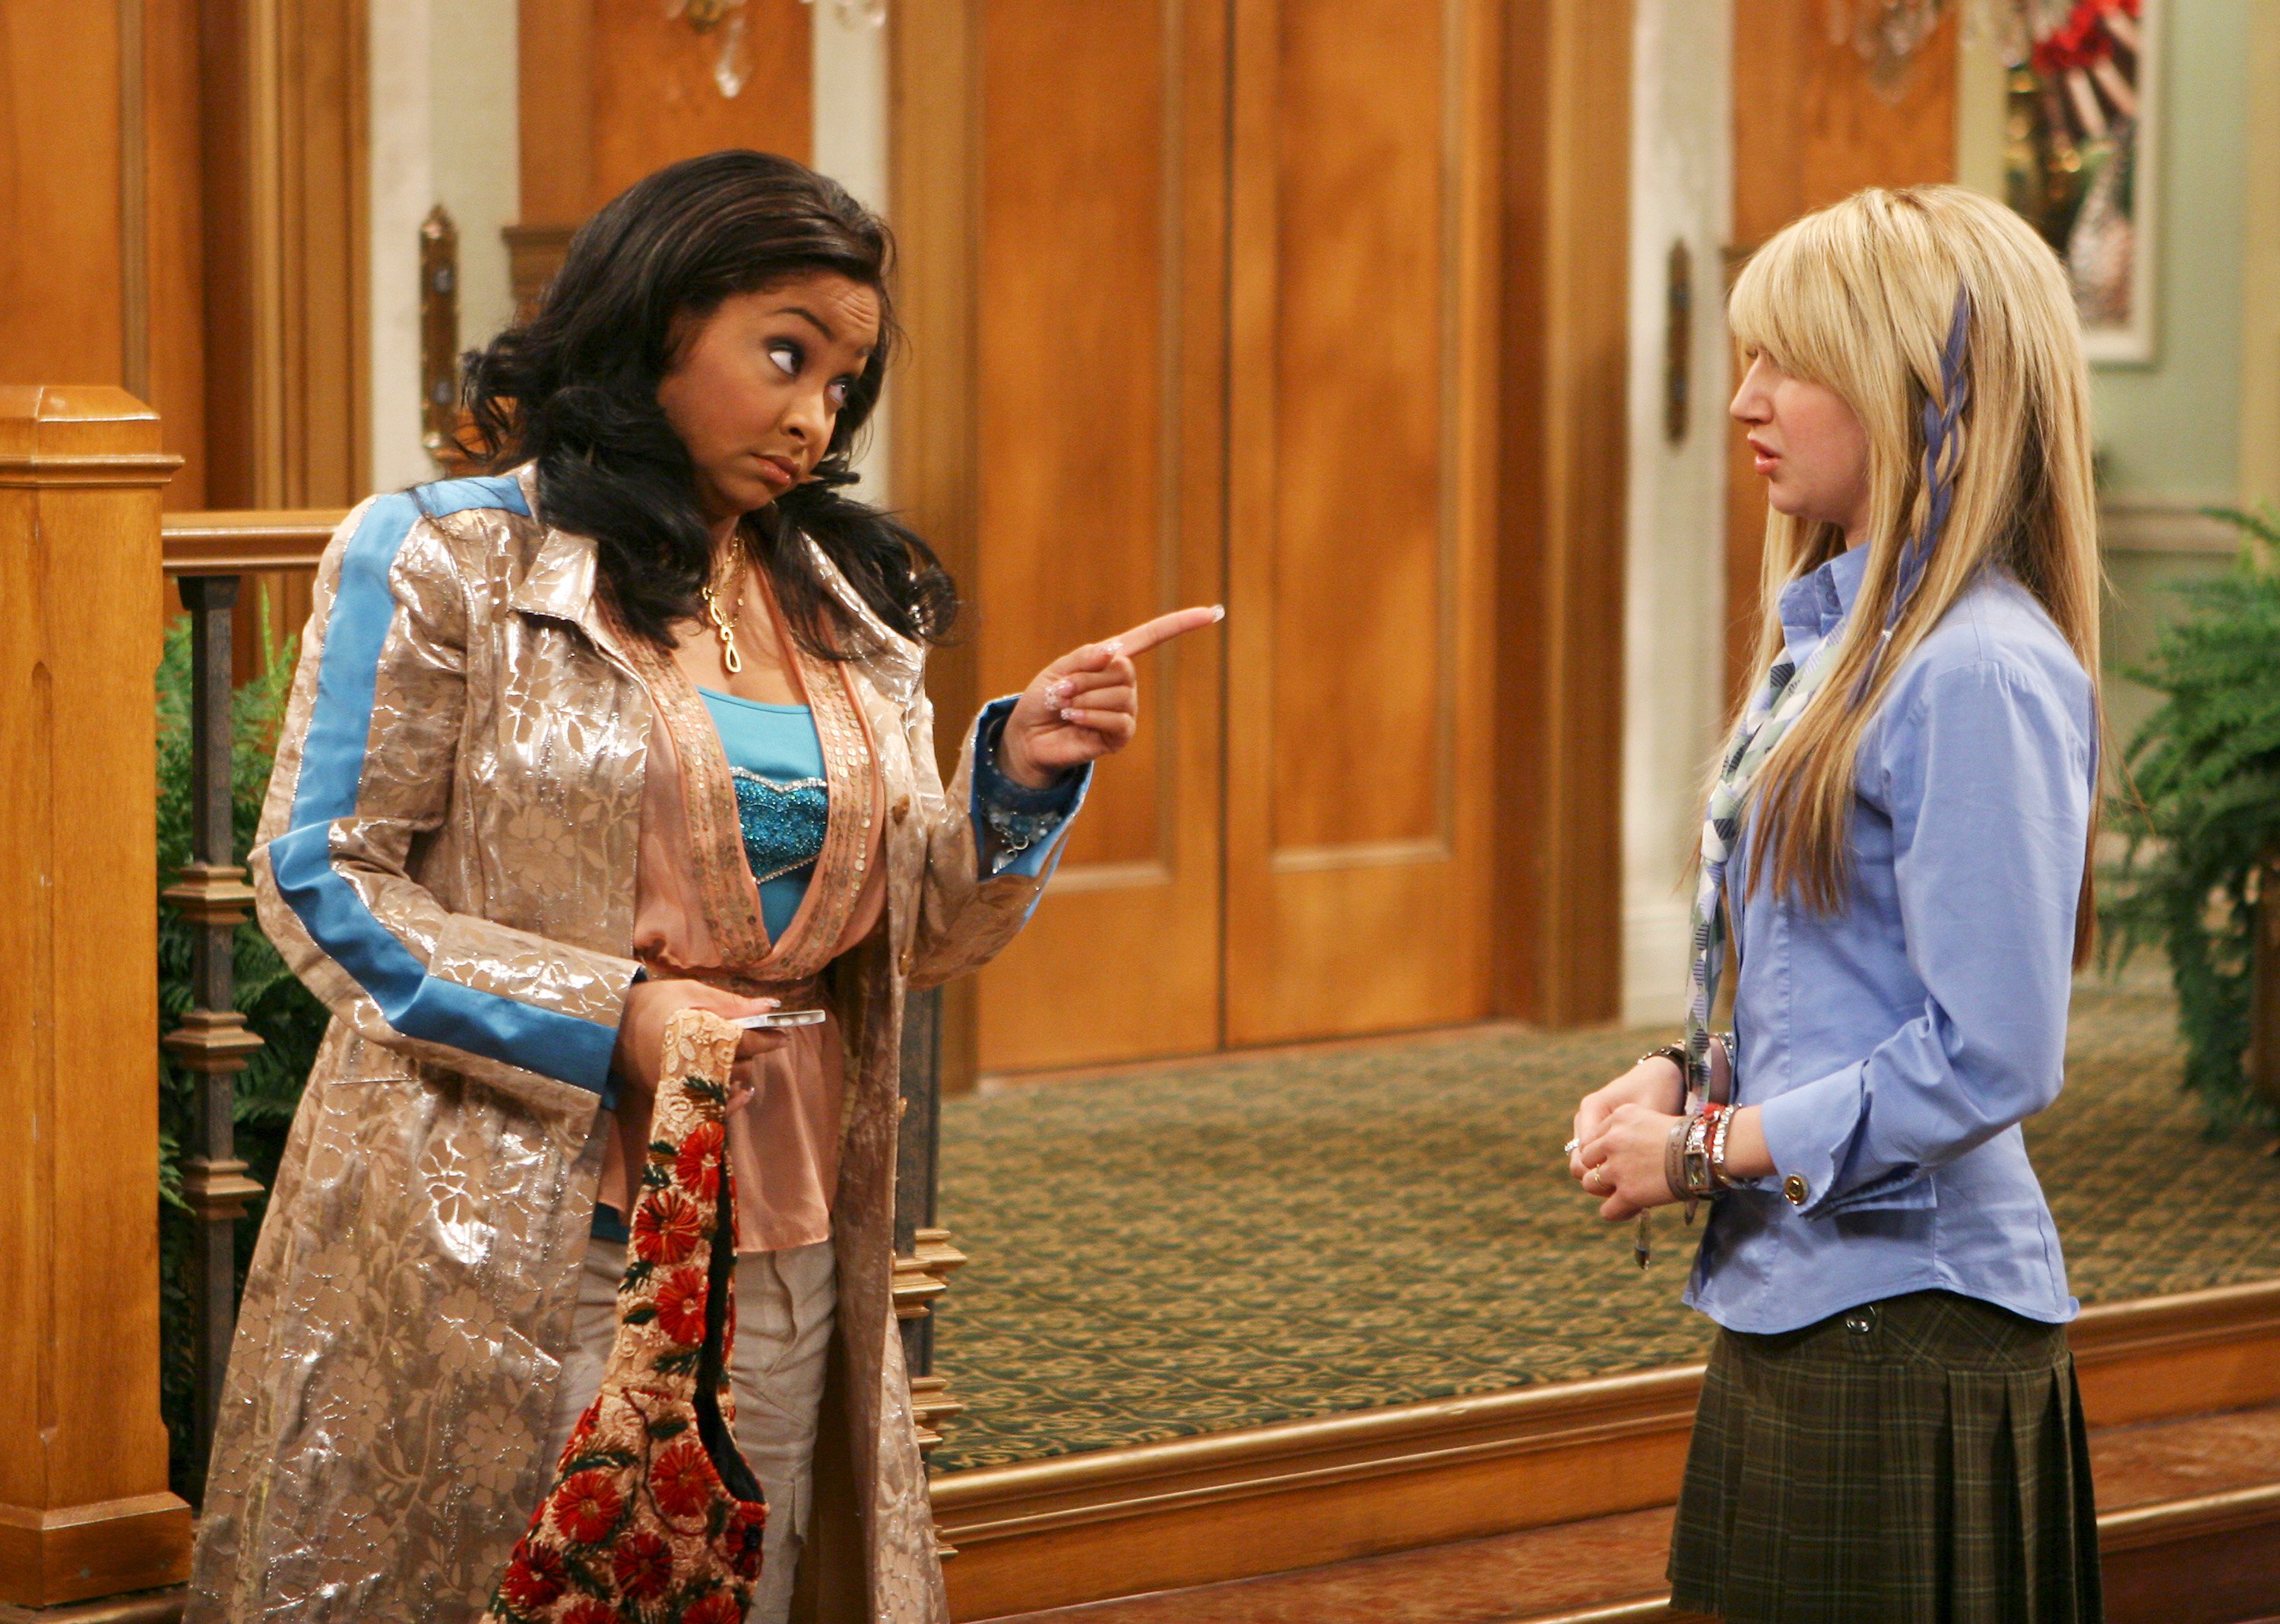 'The Suite Life of Zack and Cody' Episode Titled 'That's So Suite Life of Hannah Montana'